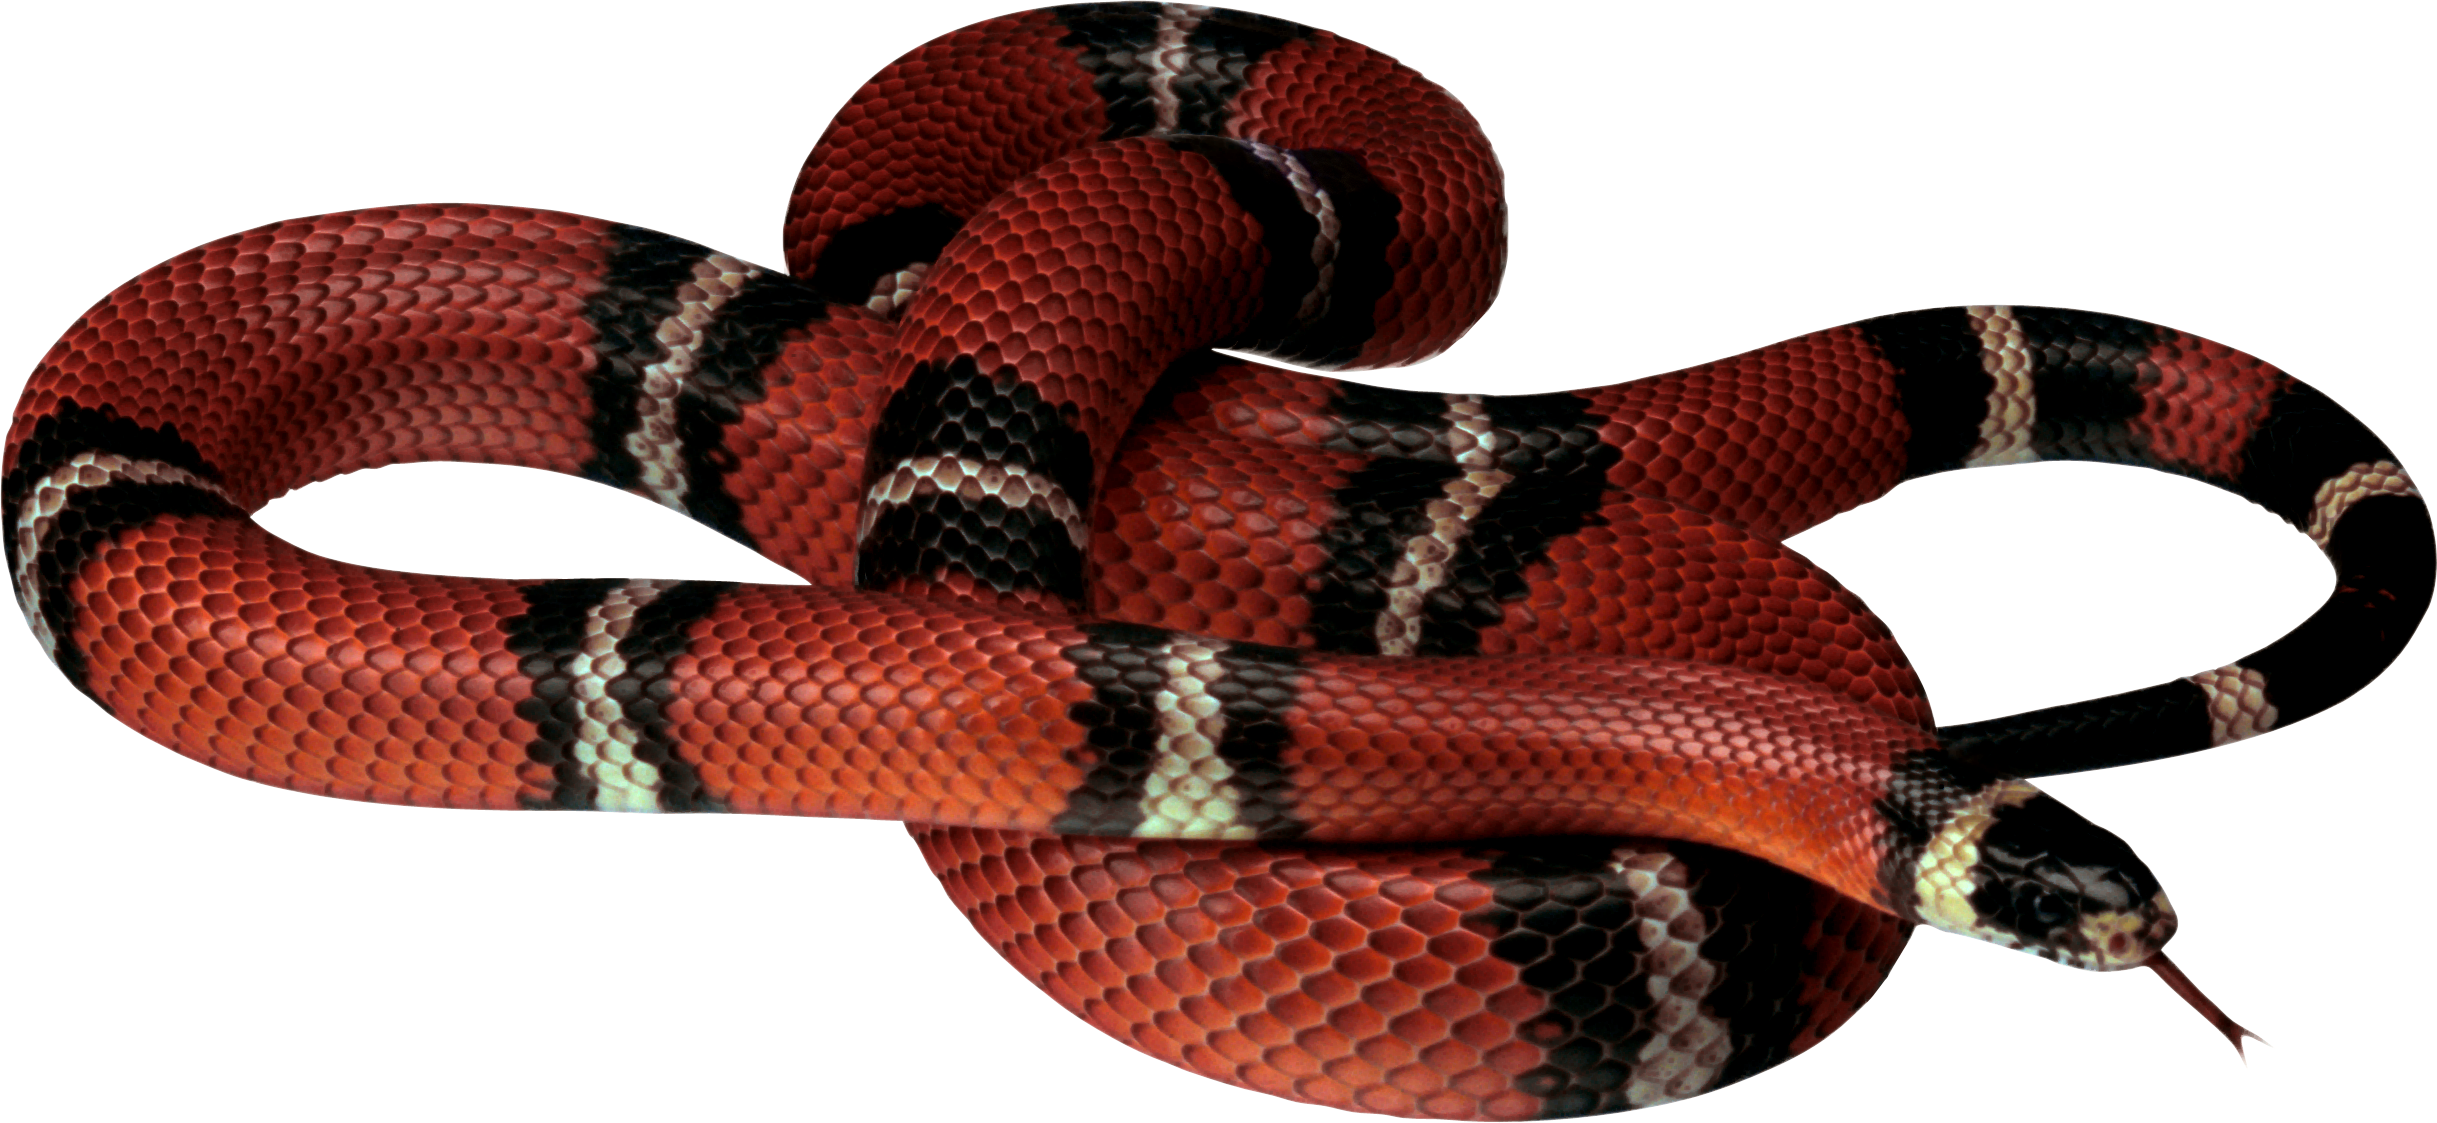 Snake Png Image Picture Download Free , HD Wallpaper & Backgrounds